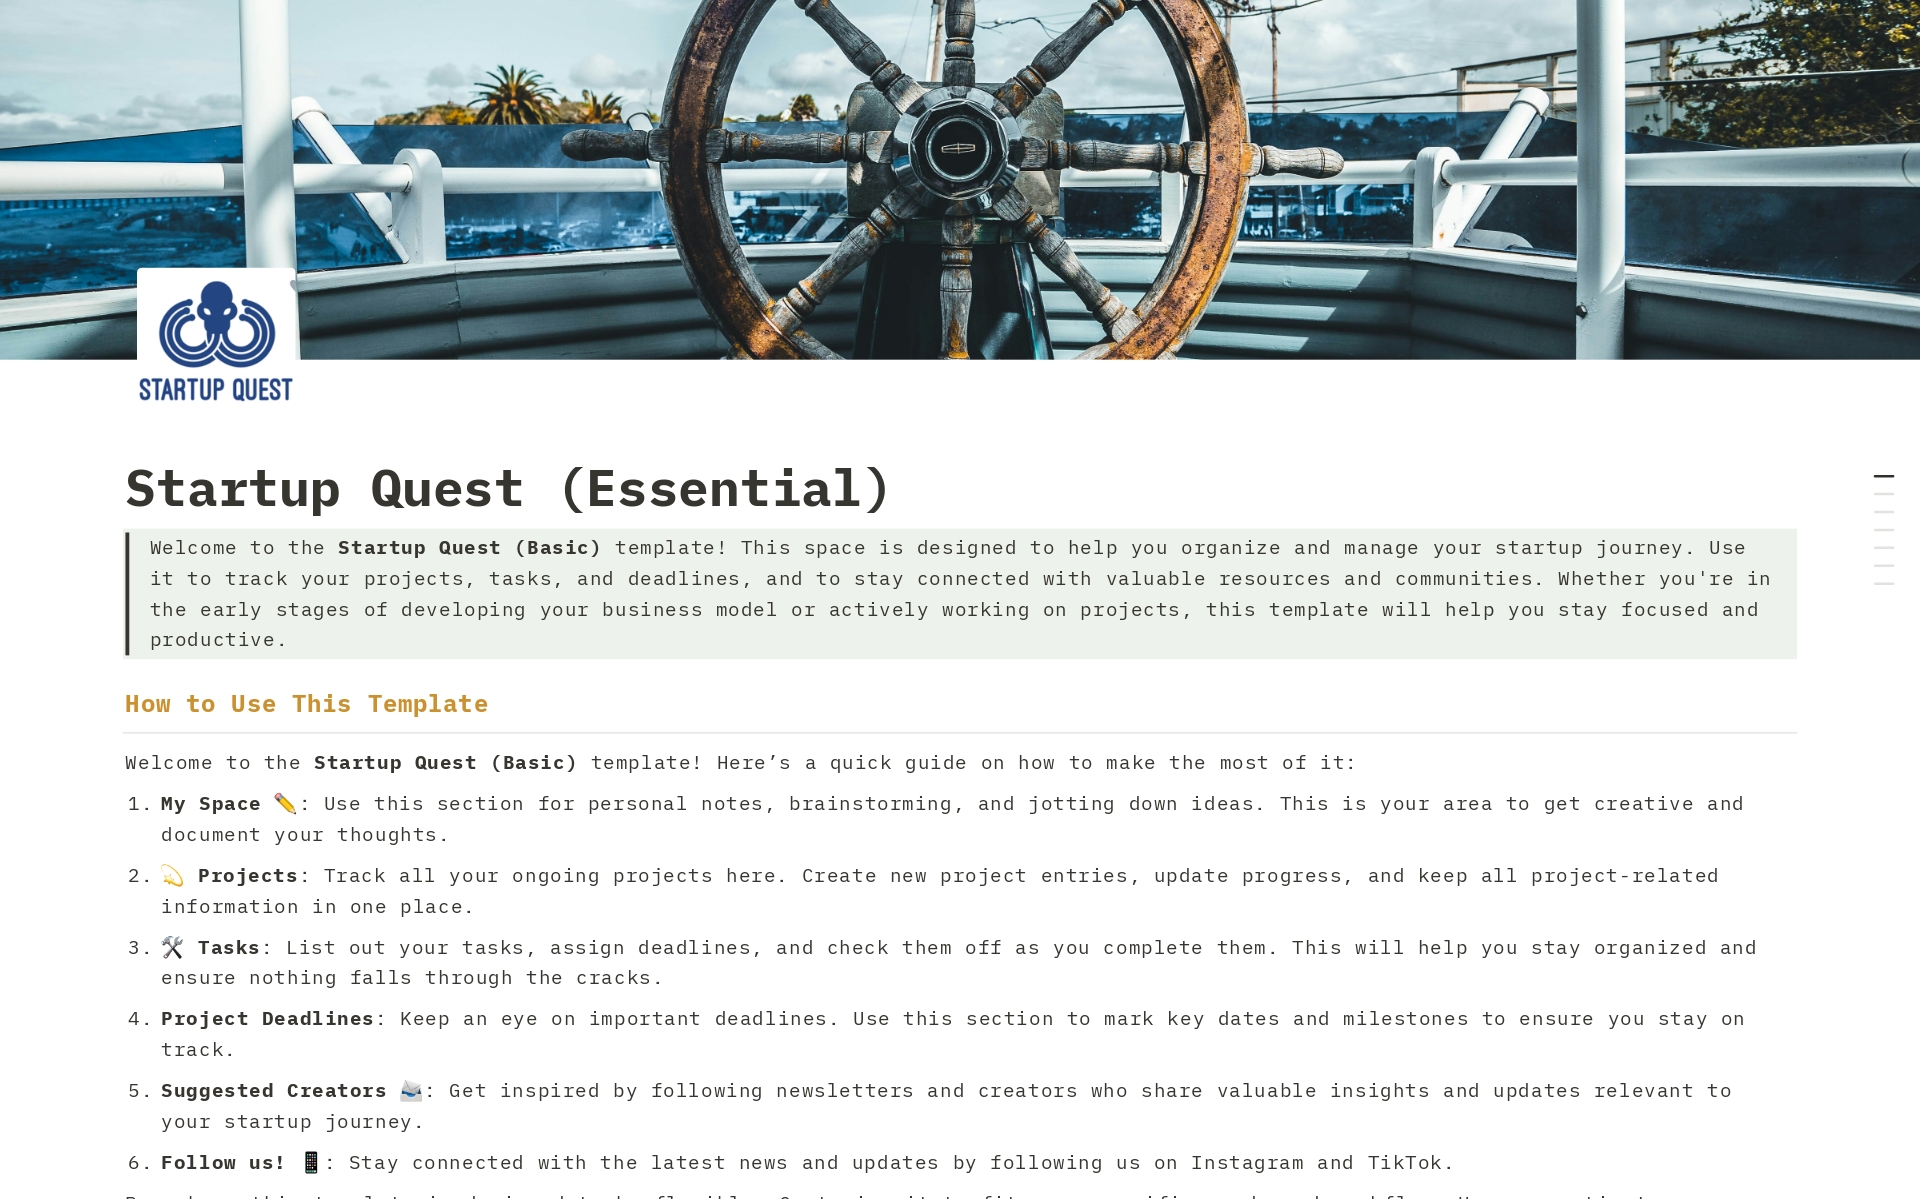 Welcome to Startup Quest (Essential)! This Notion template is your comprehensive solution for organizing and managing your startup journey. Whether you're just starting to develop your business model or actively working on projects, this template is designed to keep you focused.